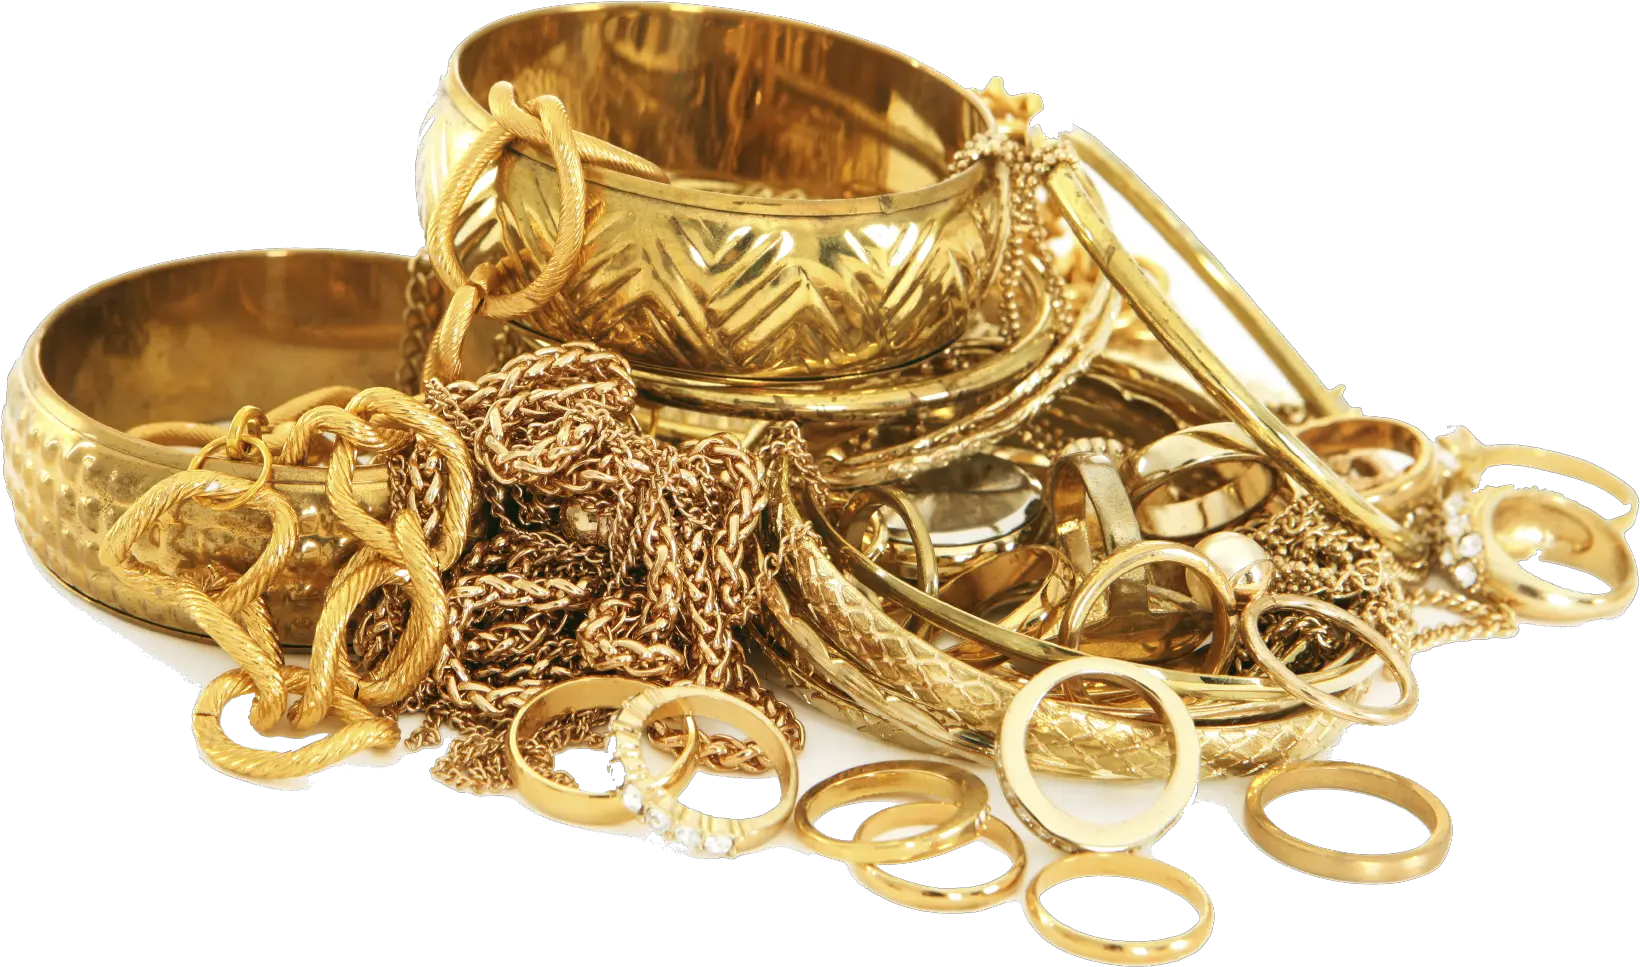 Download Gold Jewelry Png Pic 221 Gold Jewelry Png Jewelry Png